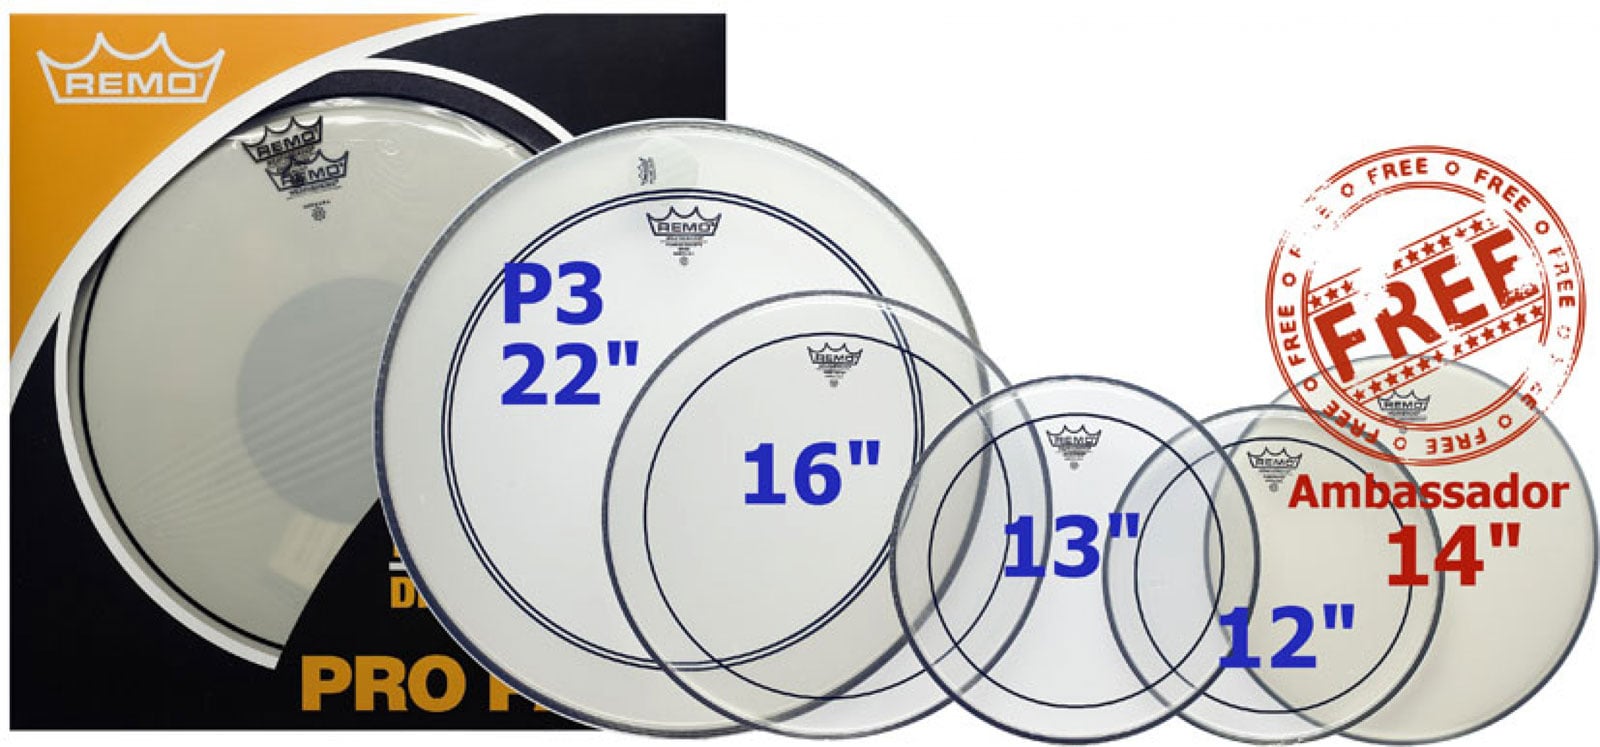 REMO PP-0270-PS - PINSTRIPE CLEAR PRO PACK - 12/13/16 + 22 (POWERSTROKE 3) BASS DRUM + 14 (AMBASSADOR C